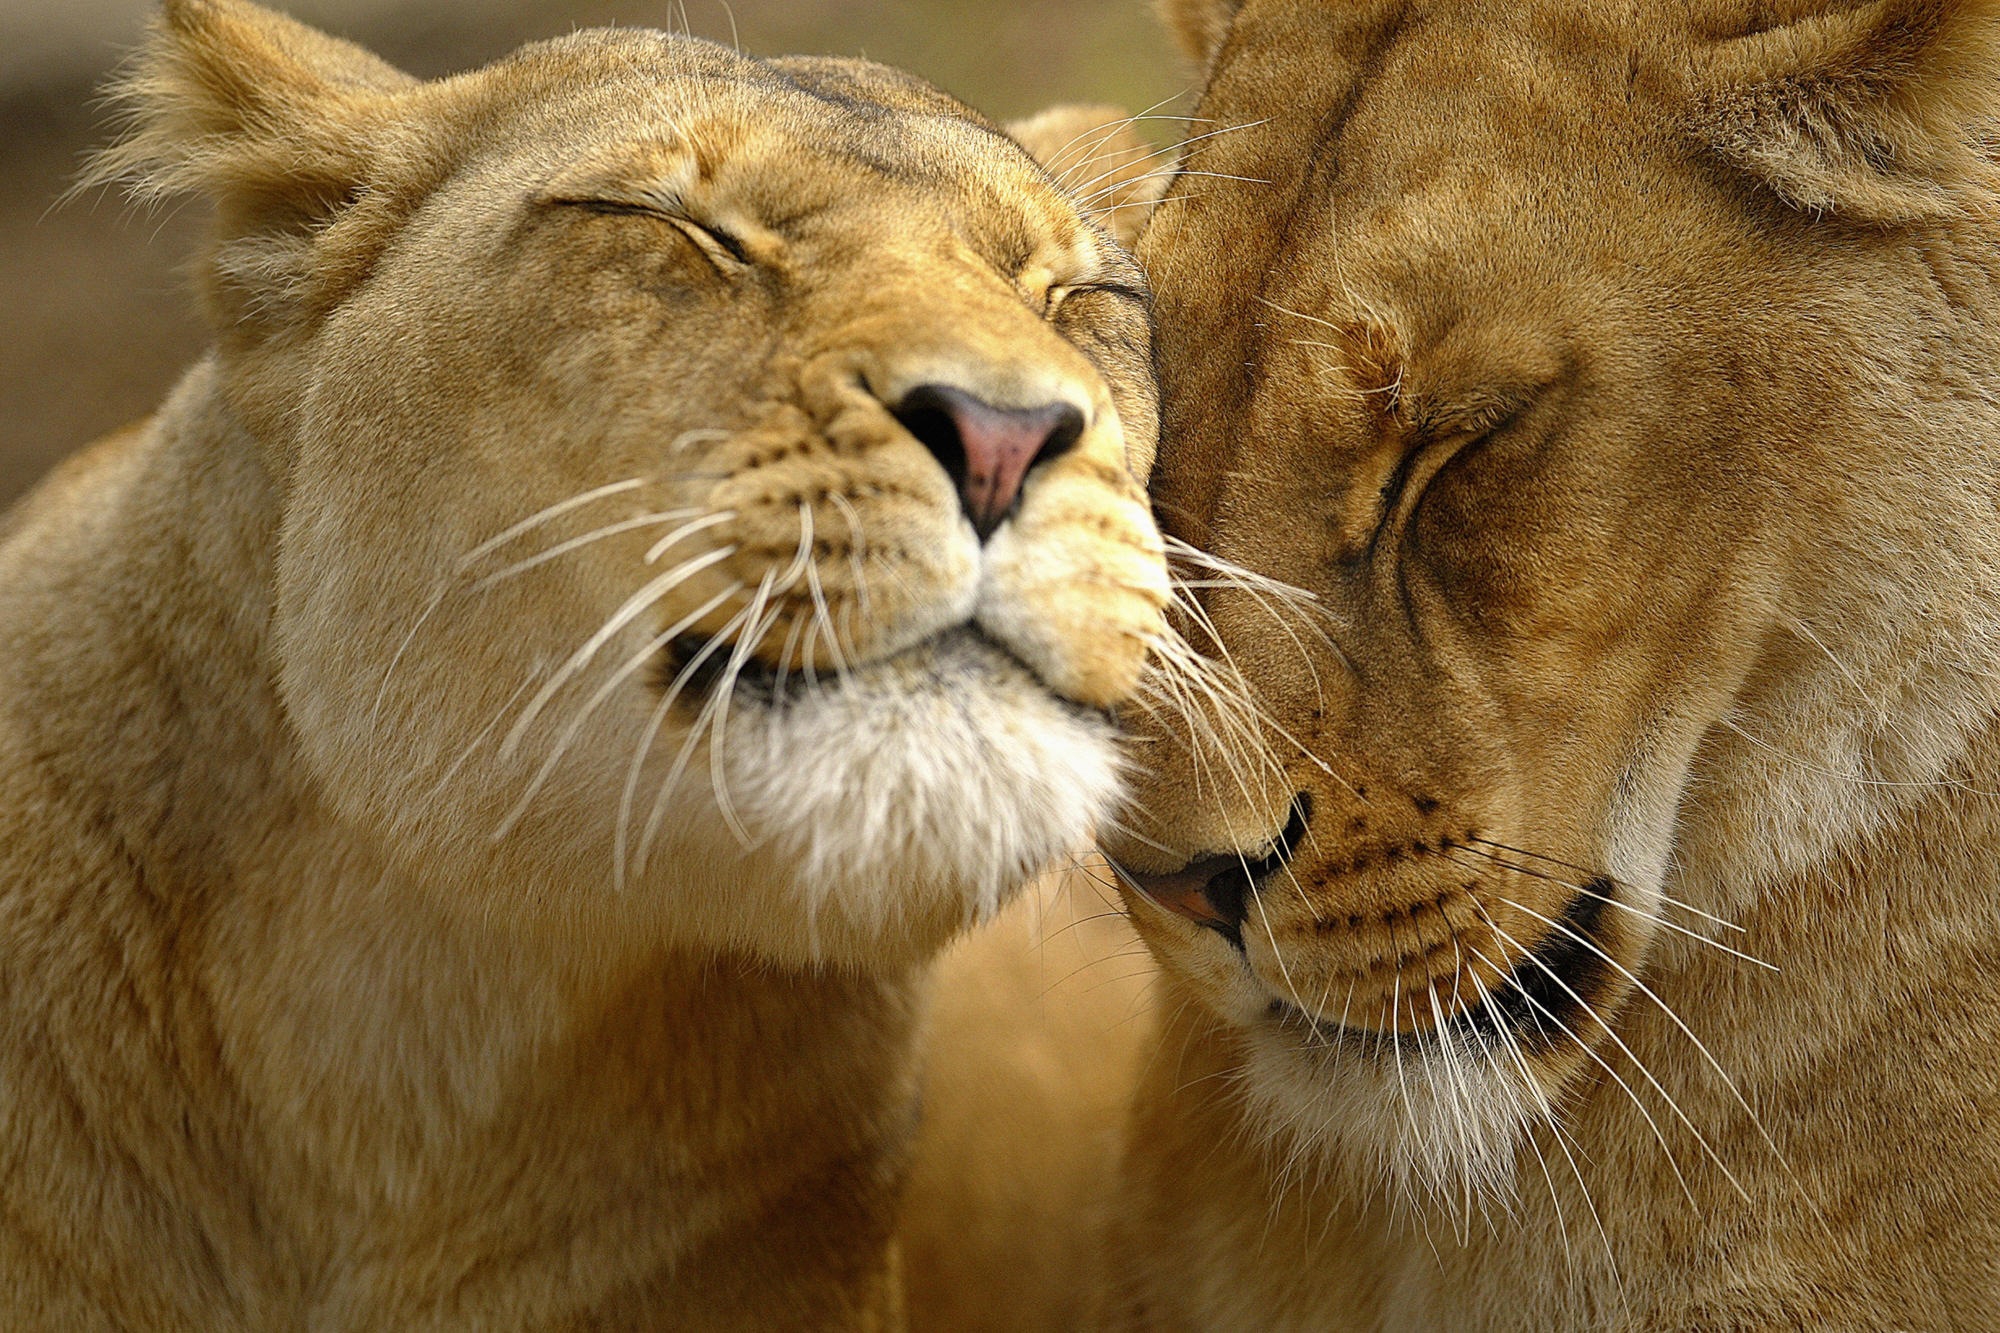 Wallpaper for mobile devices muzzle, couple, animals, tenderness